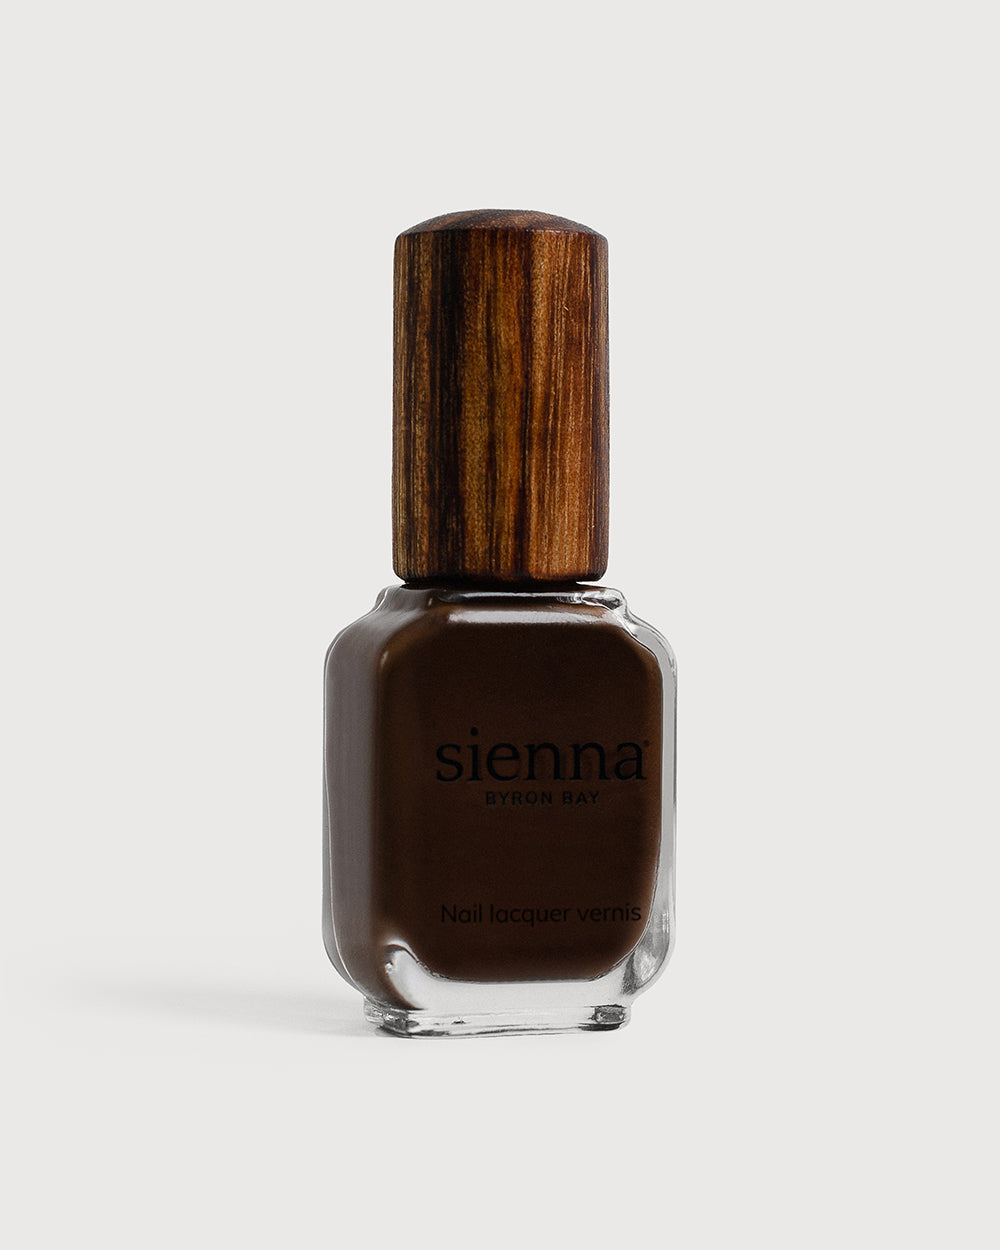 chocolate brown nail polish glass bottle with timber cap